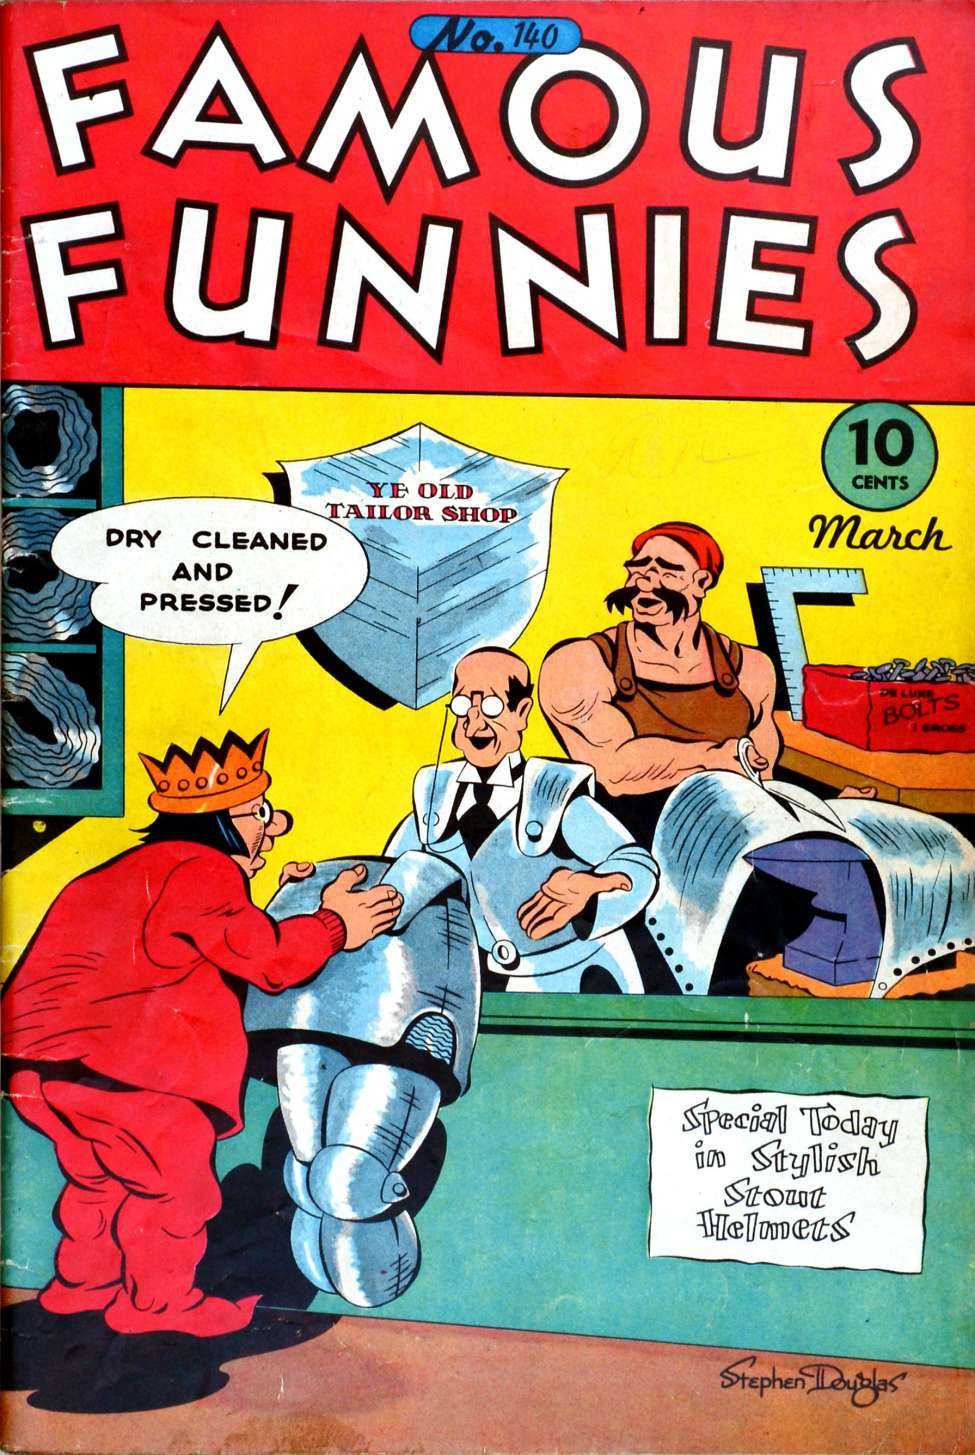 Book Cover For Famous Funnies 140 - Version 1